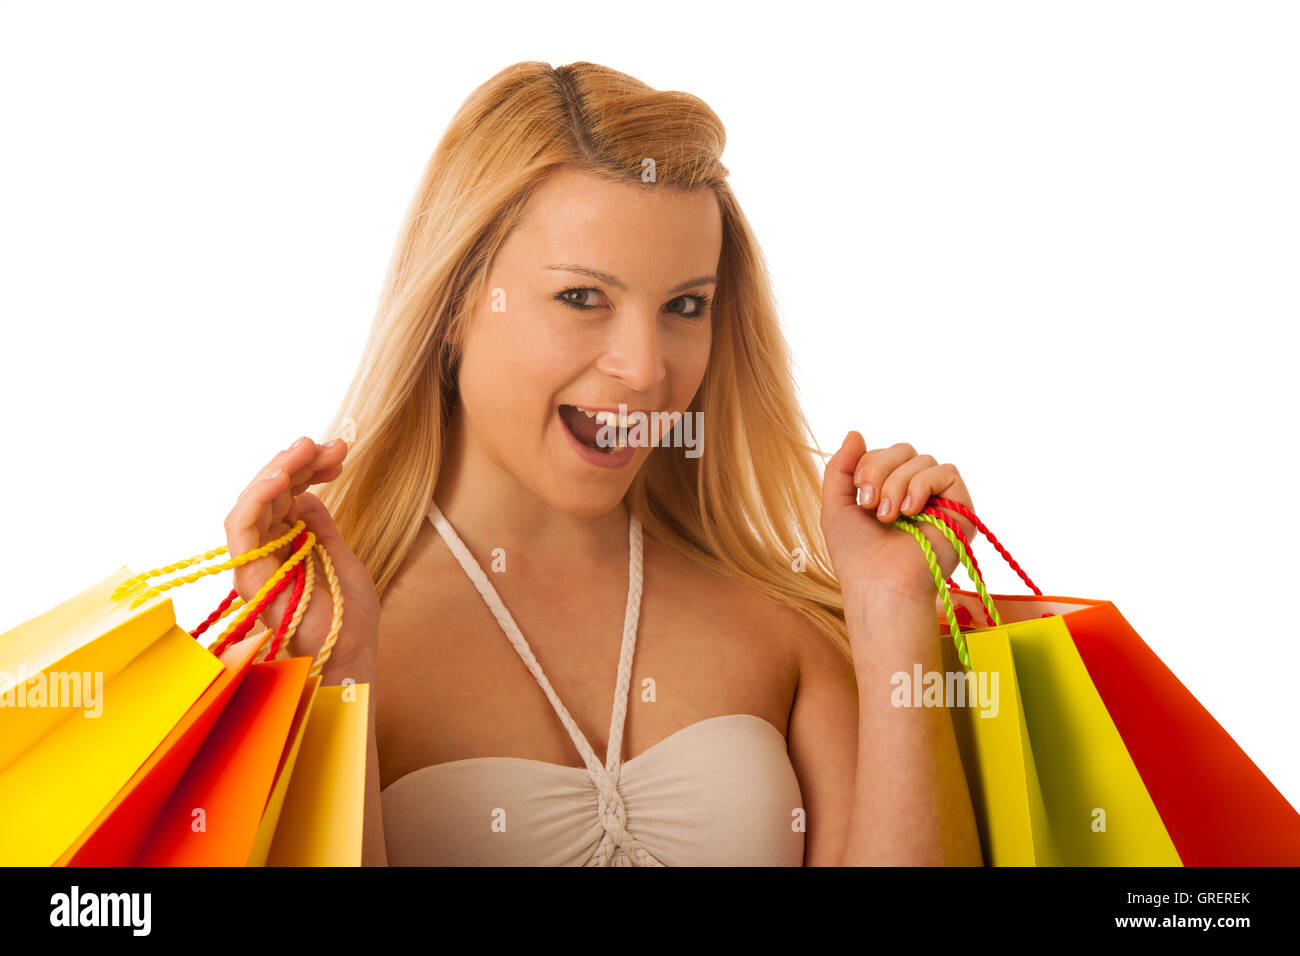 Cute blonde woman with shopping bags dynamique isolated over white background studio shot Banque D'Images